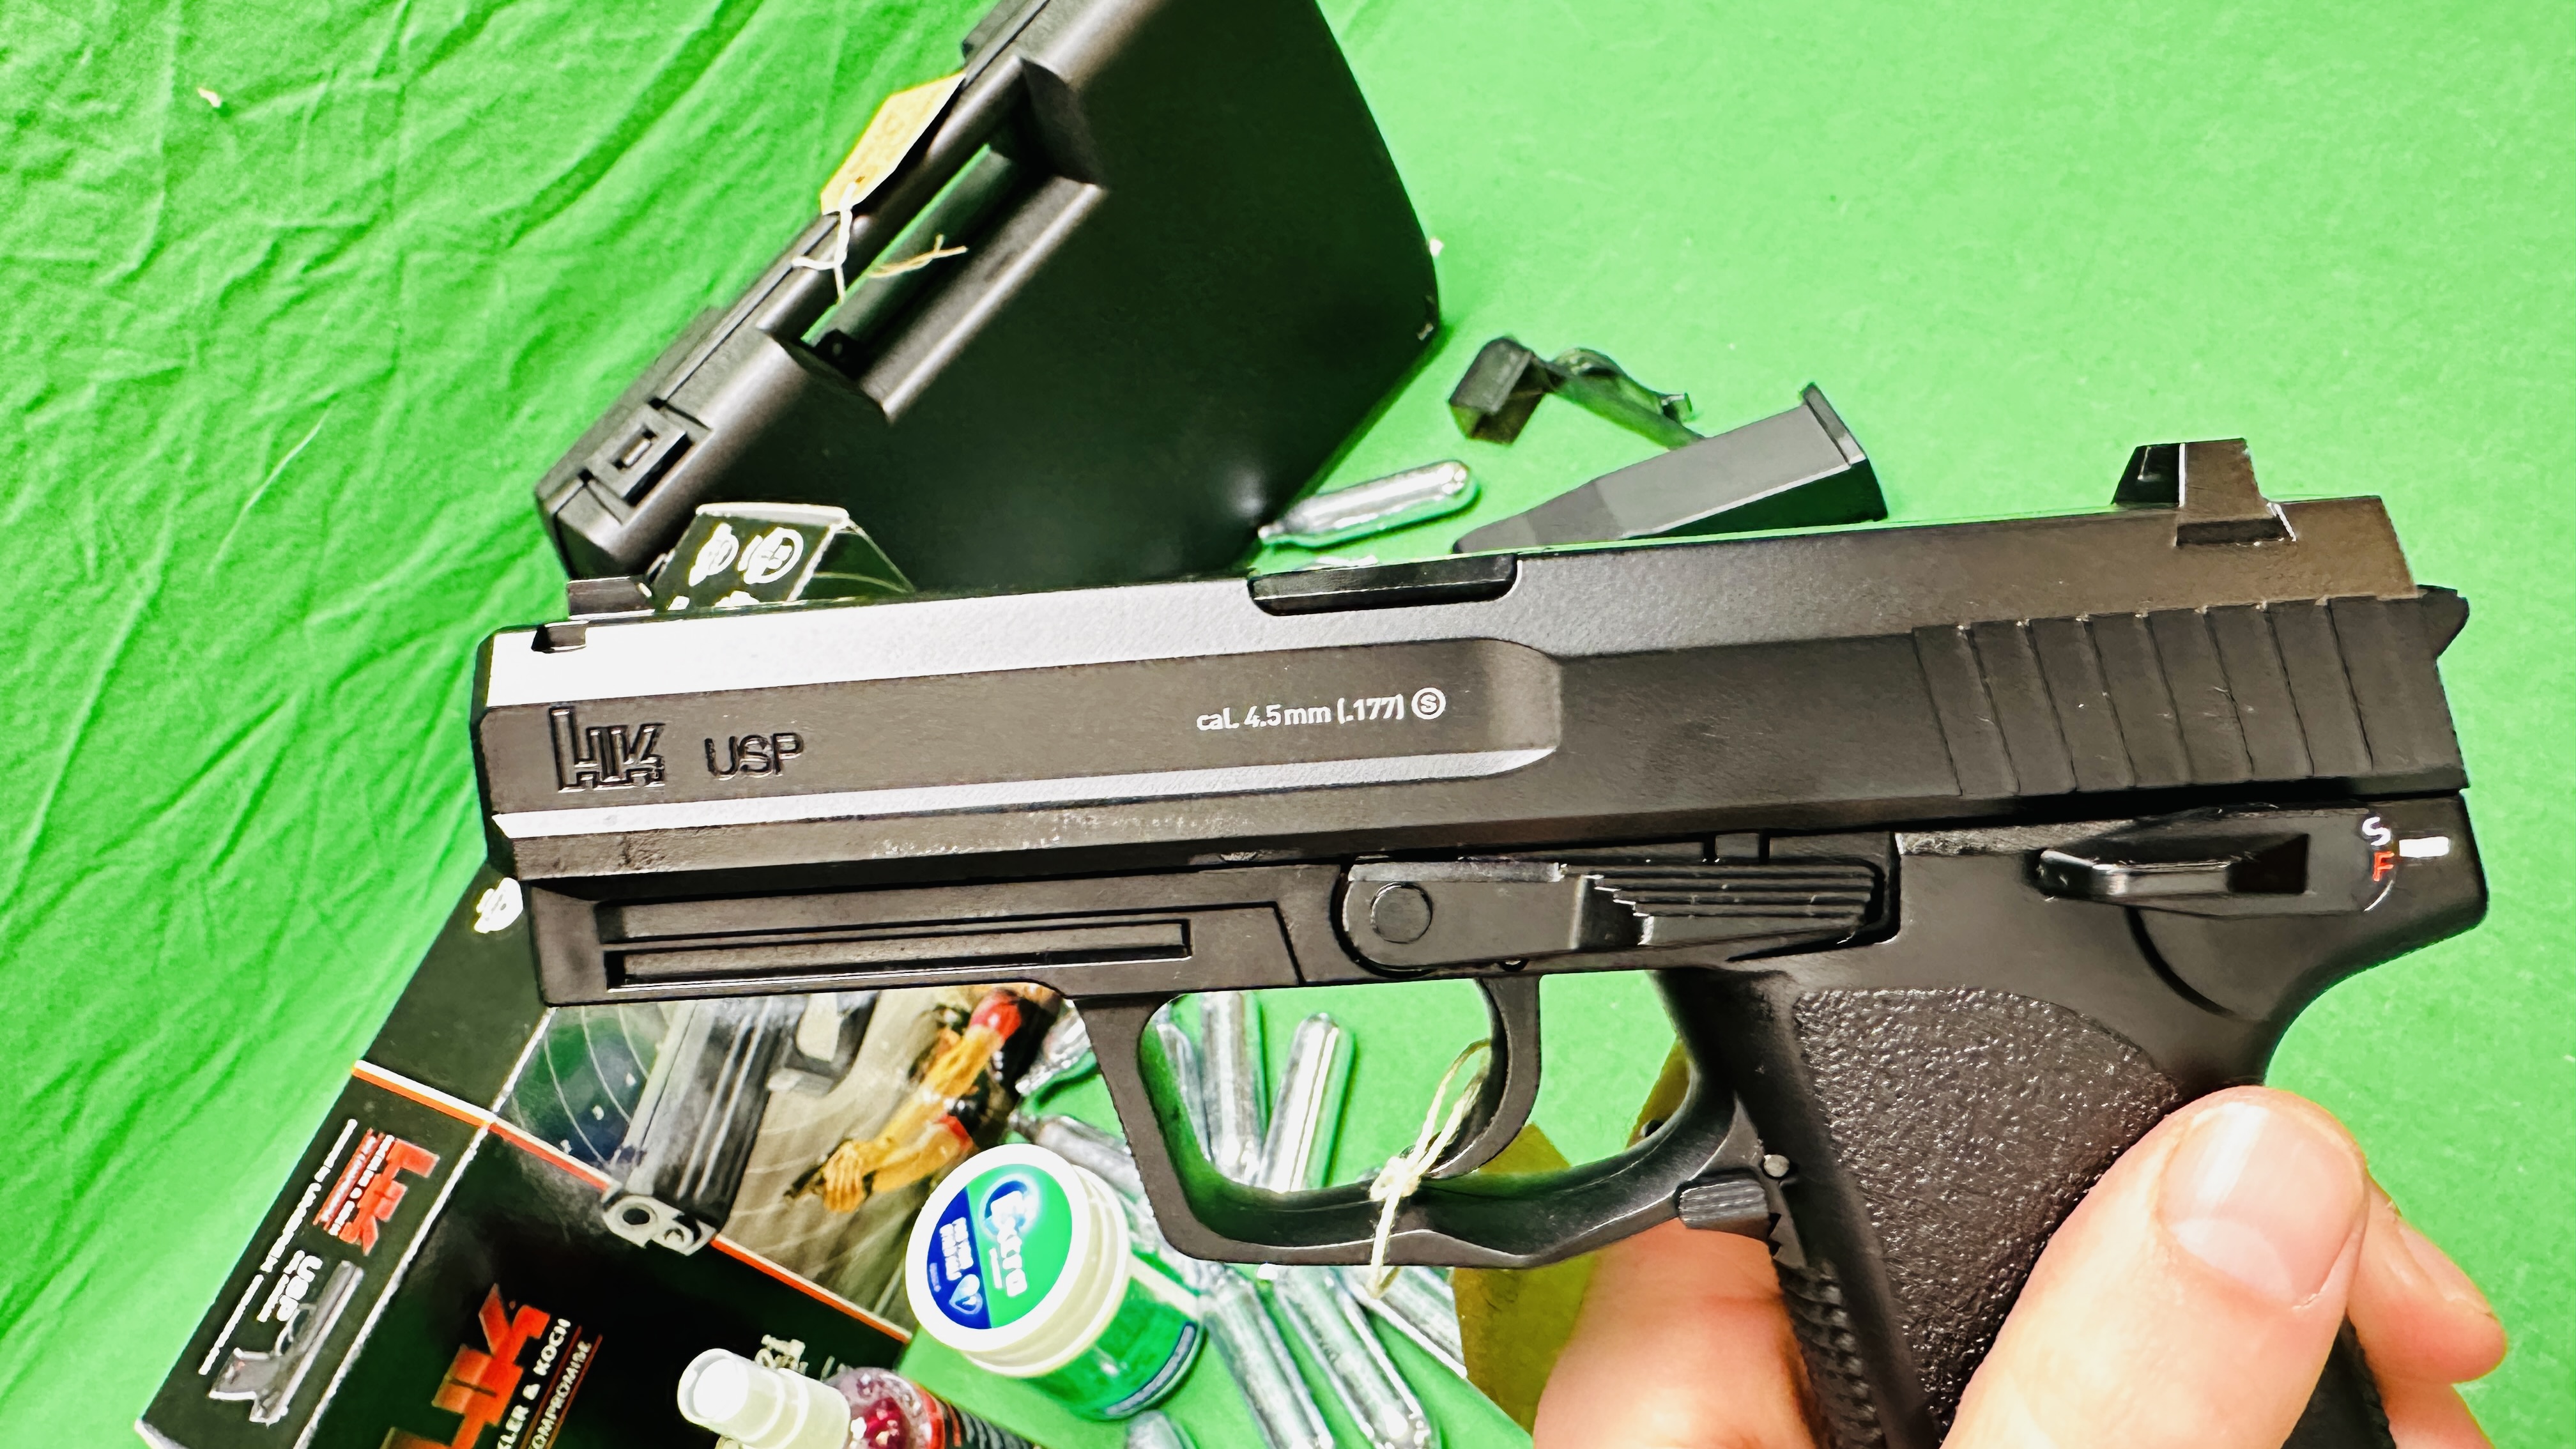 A BOXED HECKLER & KOCH USP 22 ROUND CO2 STELL BB AIR PISTOL COMPLETE WITH HARD TRANSIT CASE, - Image 10 of 15